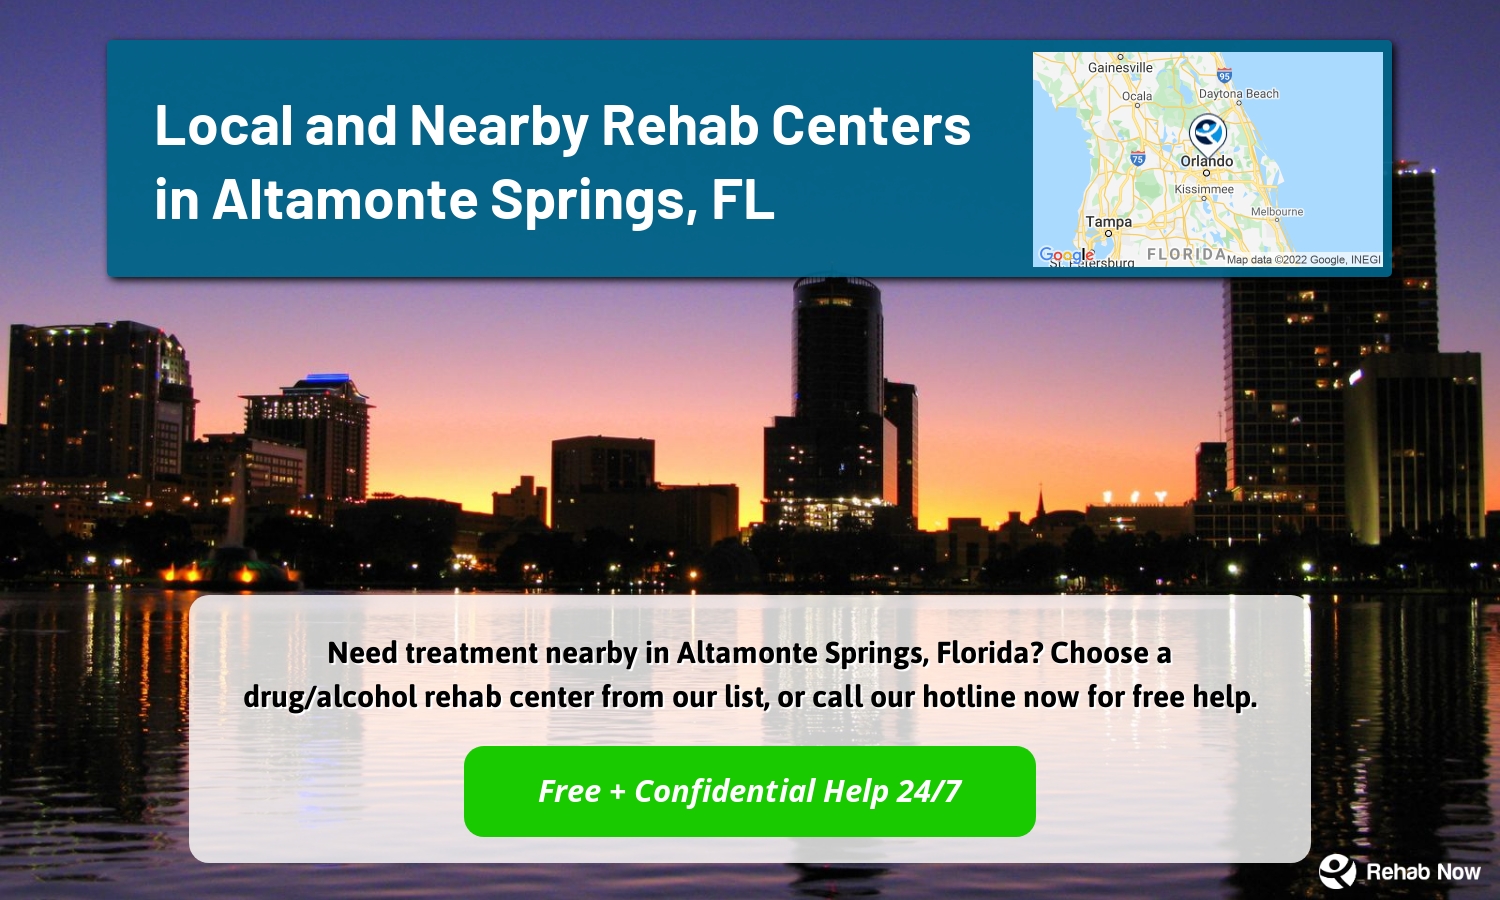 Need treatment nearby in Altamonte Springs, Florida? Choose a drug/alcohol rehab center from our list, or call our hotline now for free help.